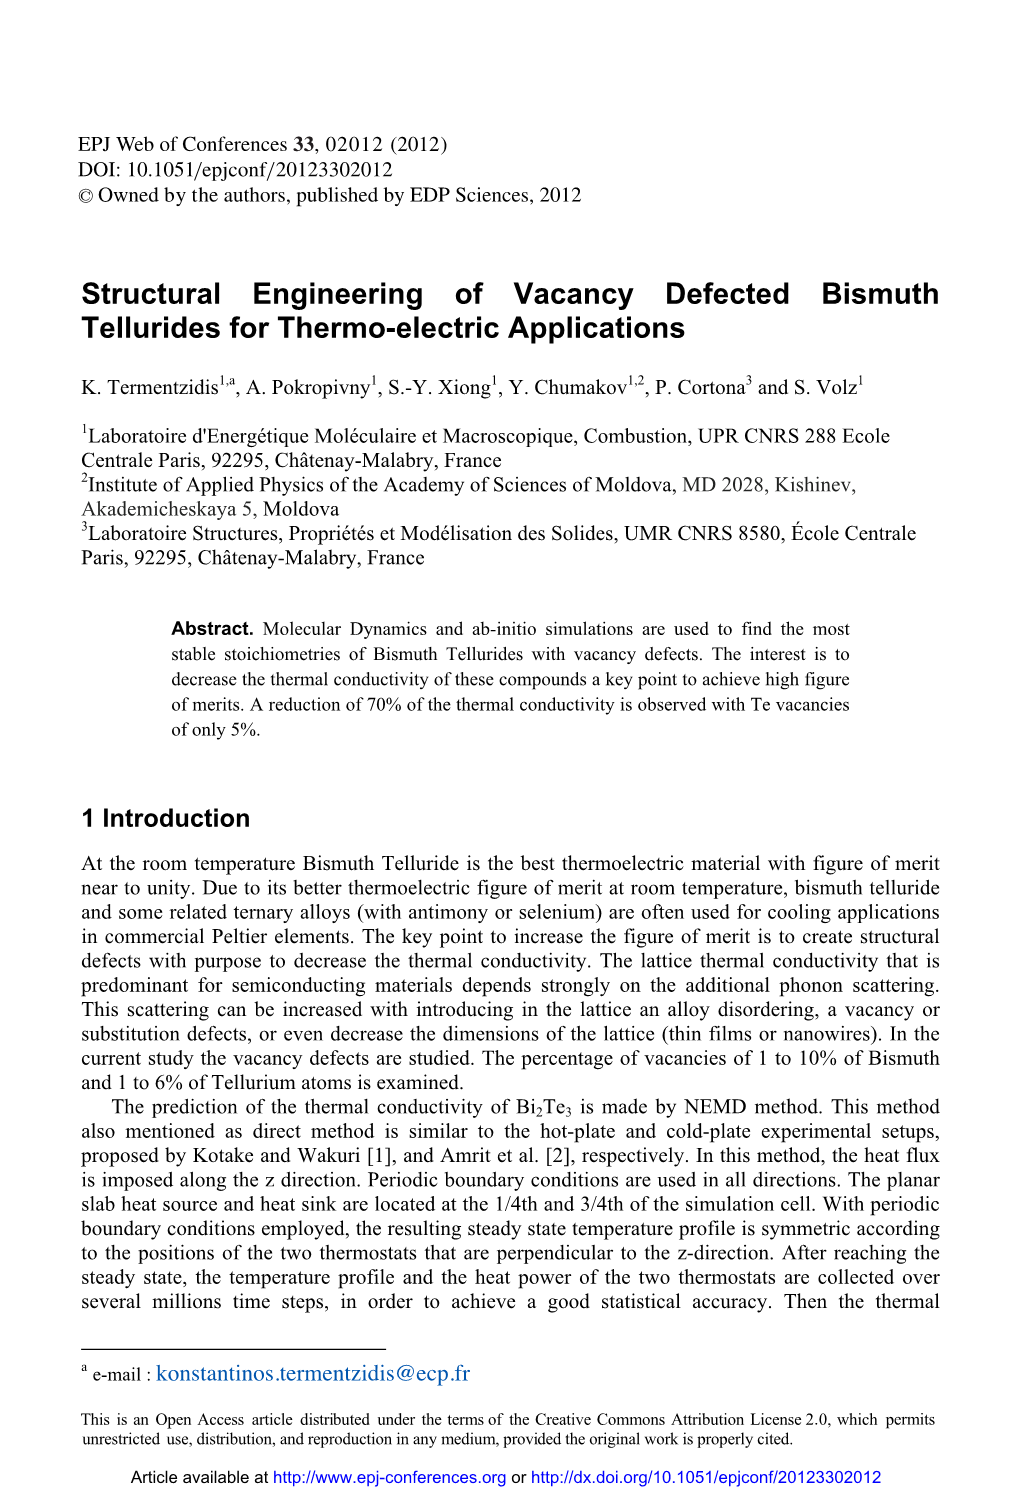 Structural Engineering of Vacancy Defected Bismuth Tellurides for Thermo-Electric Applications